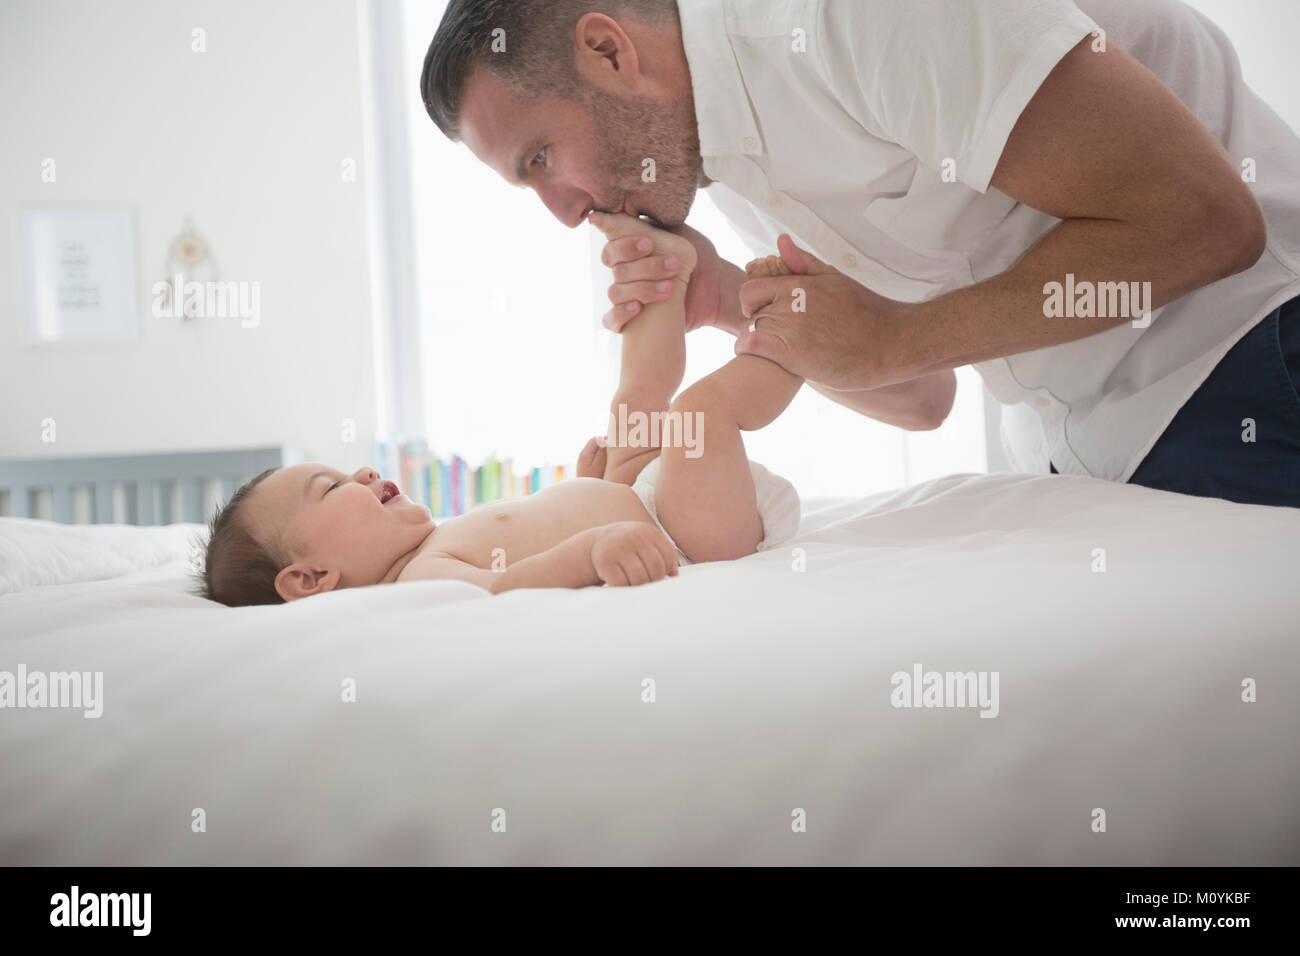 Father kissing feet of baby son on bed Stock Photo